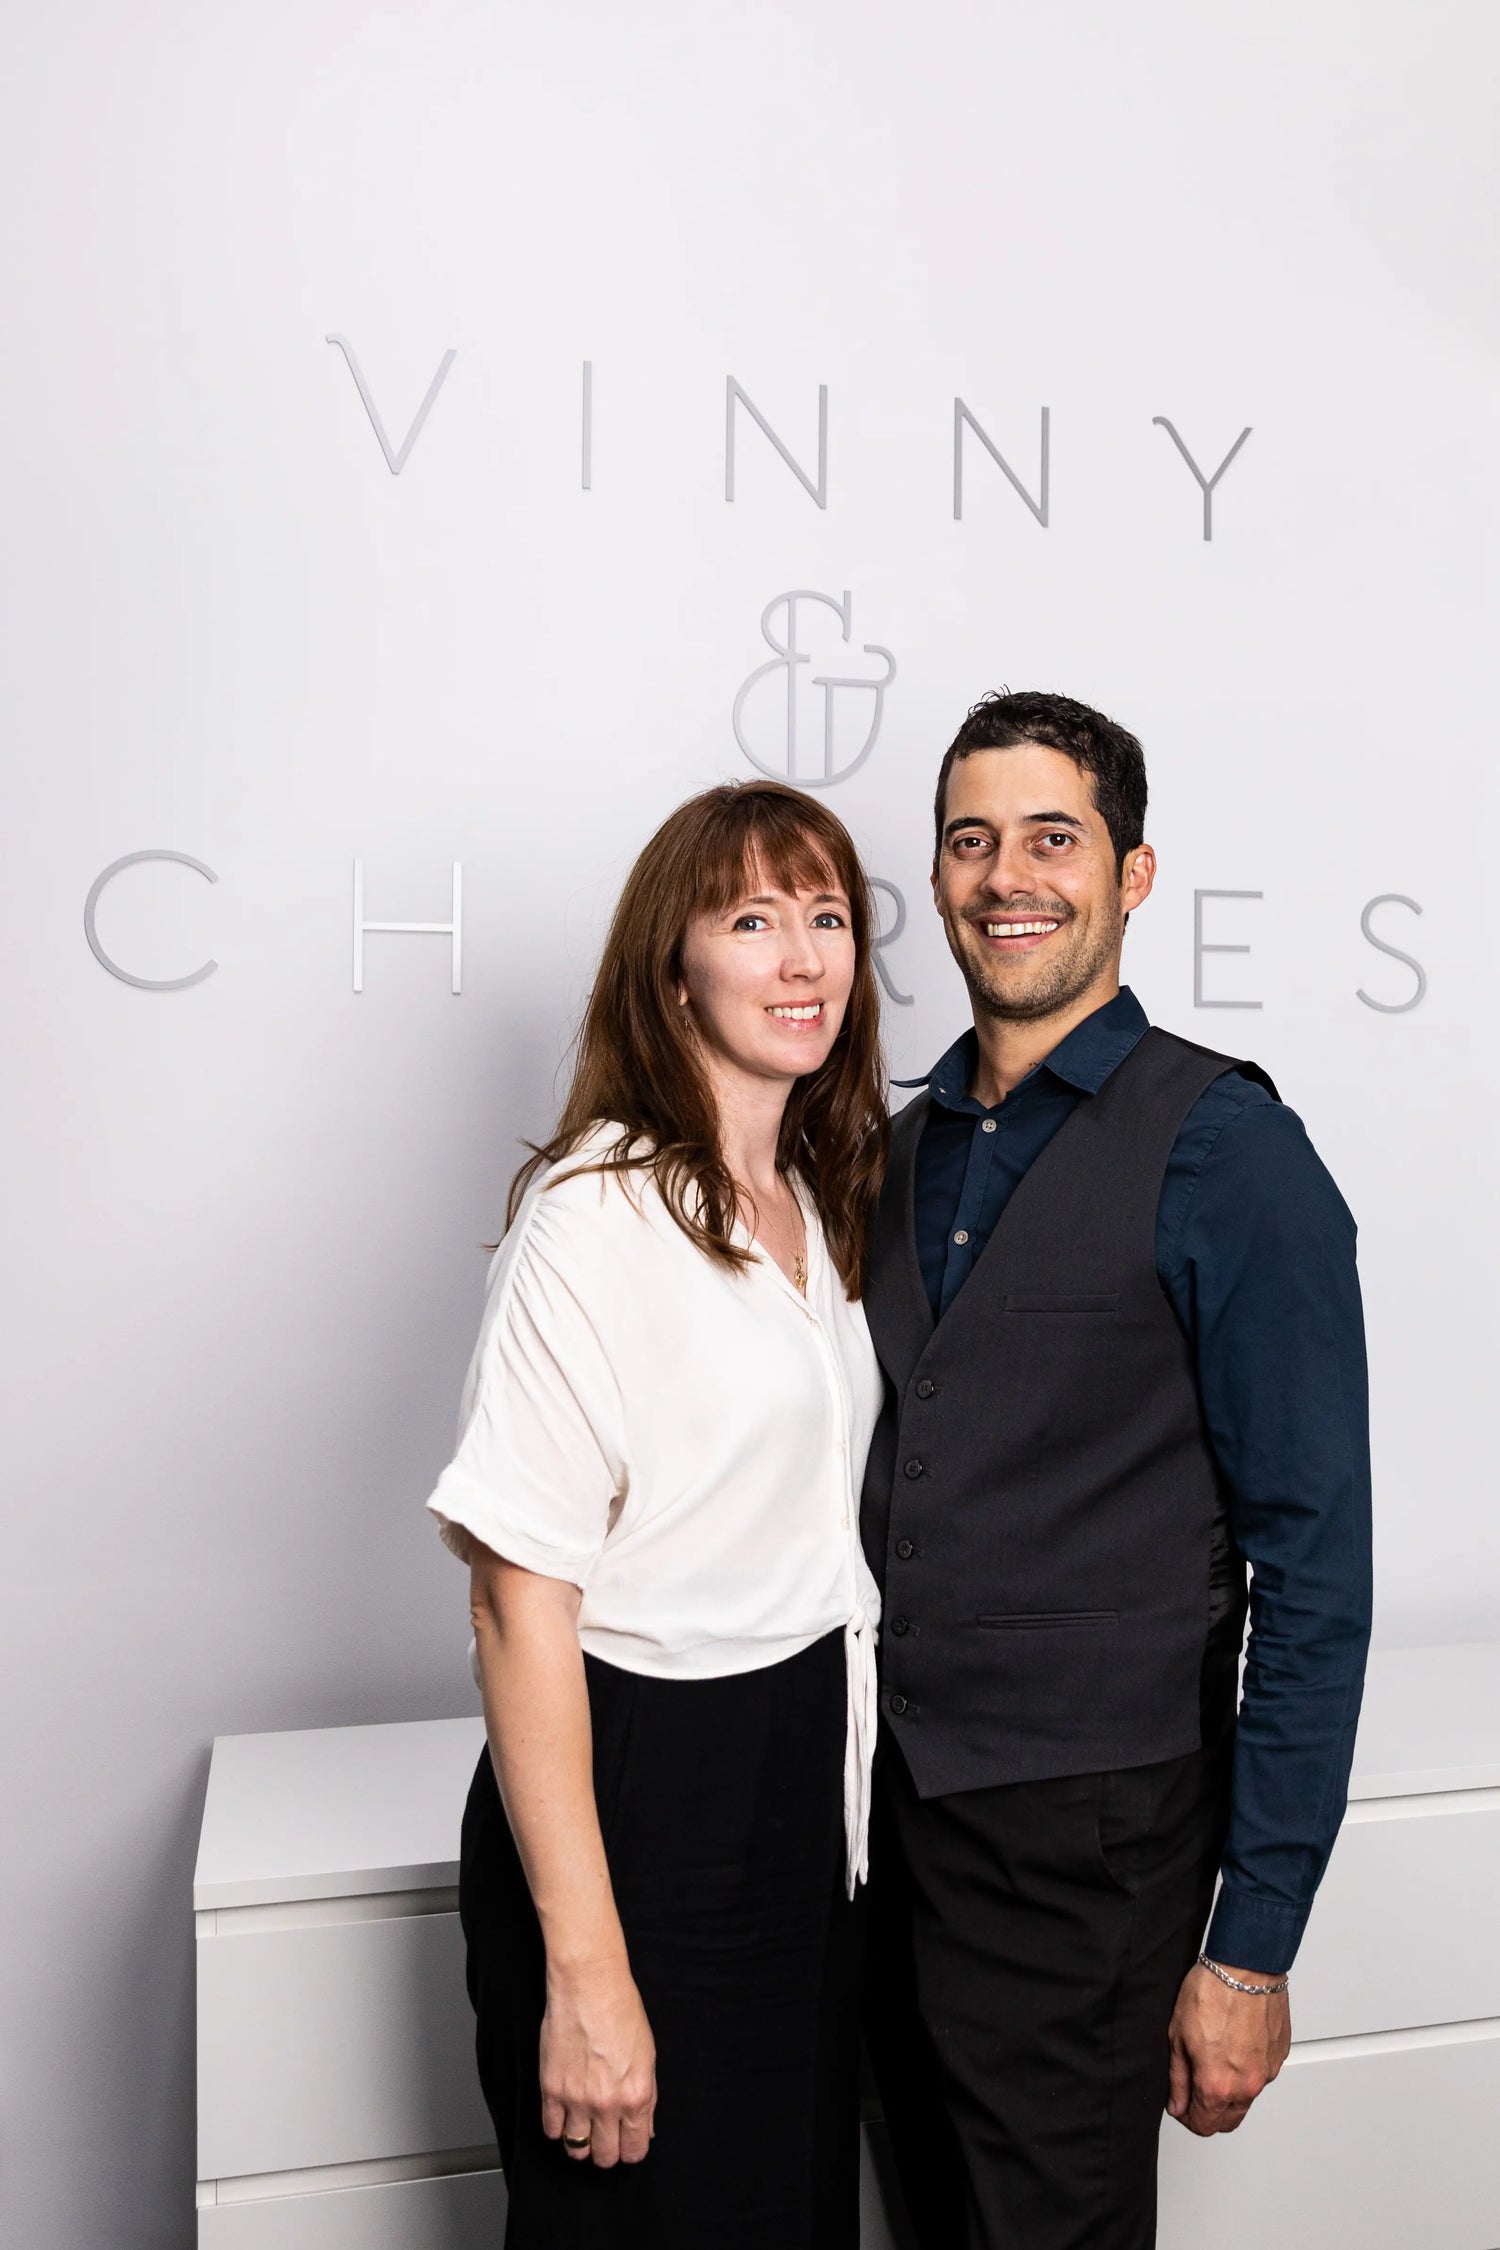 Photograph of Melody and Chris standing together, with the Vinny & Charles logo featured on the wall behind them. 